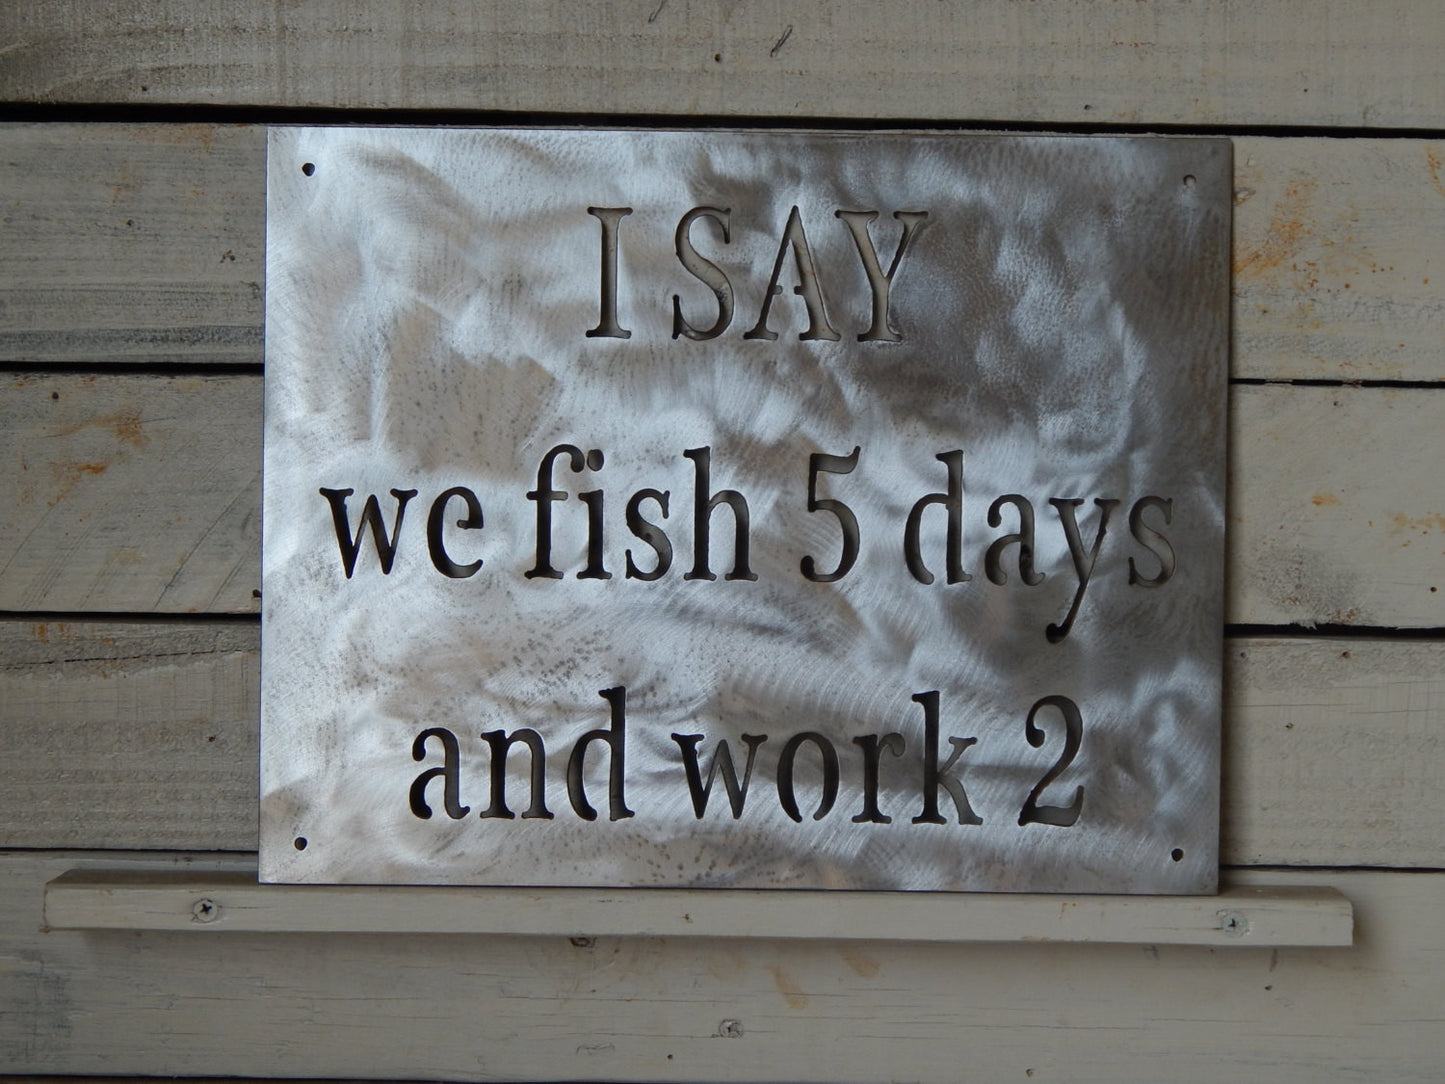 I SAY we fish 5 days and work 2